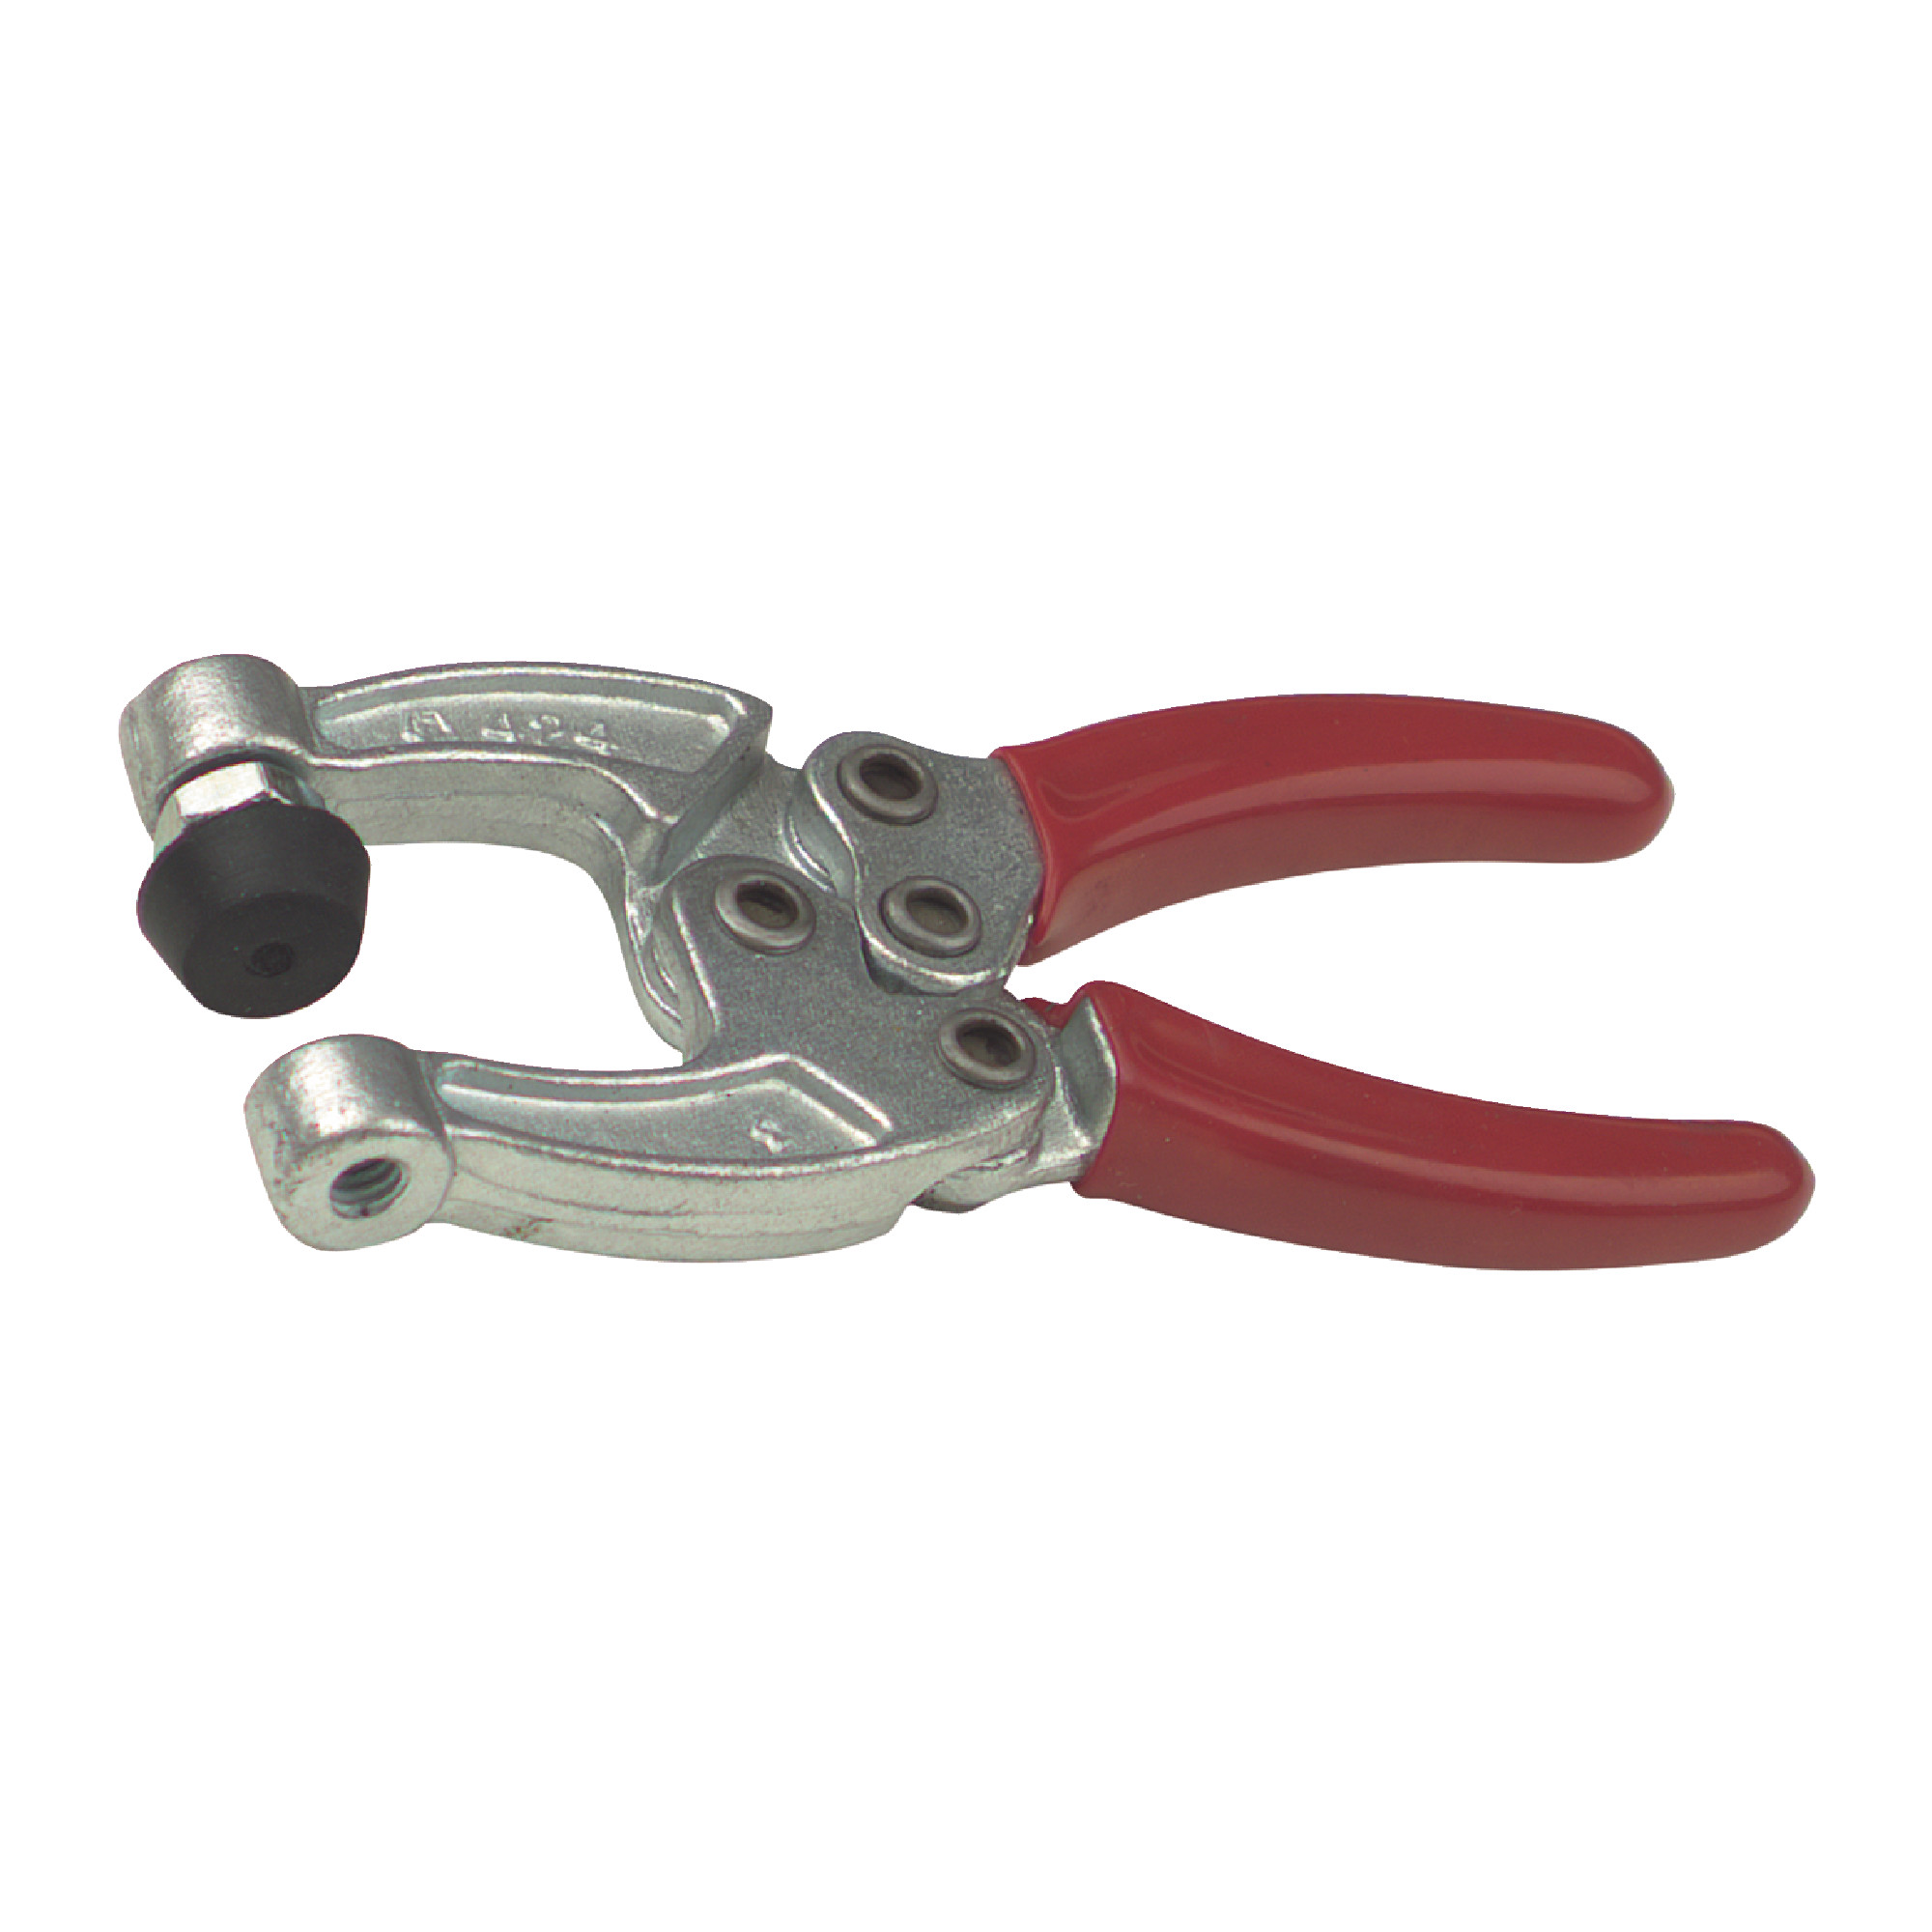 Squeeze Action Forged Jaws Toggle Clamp